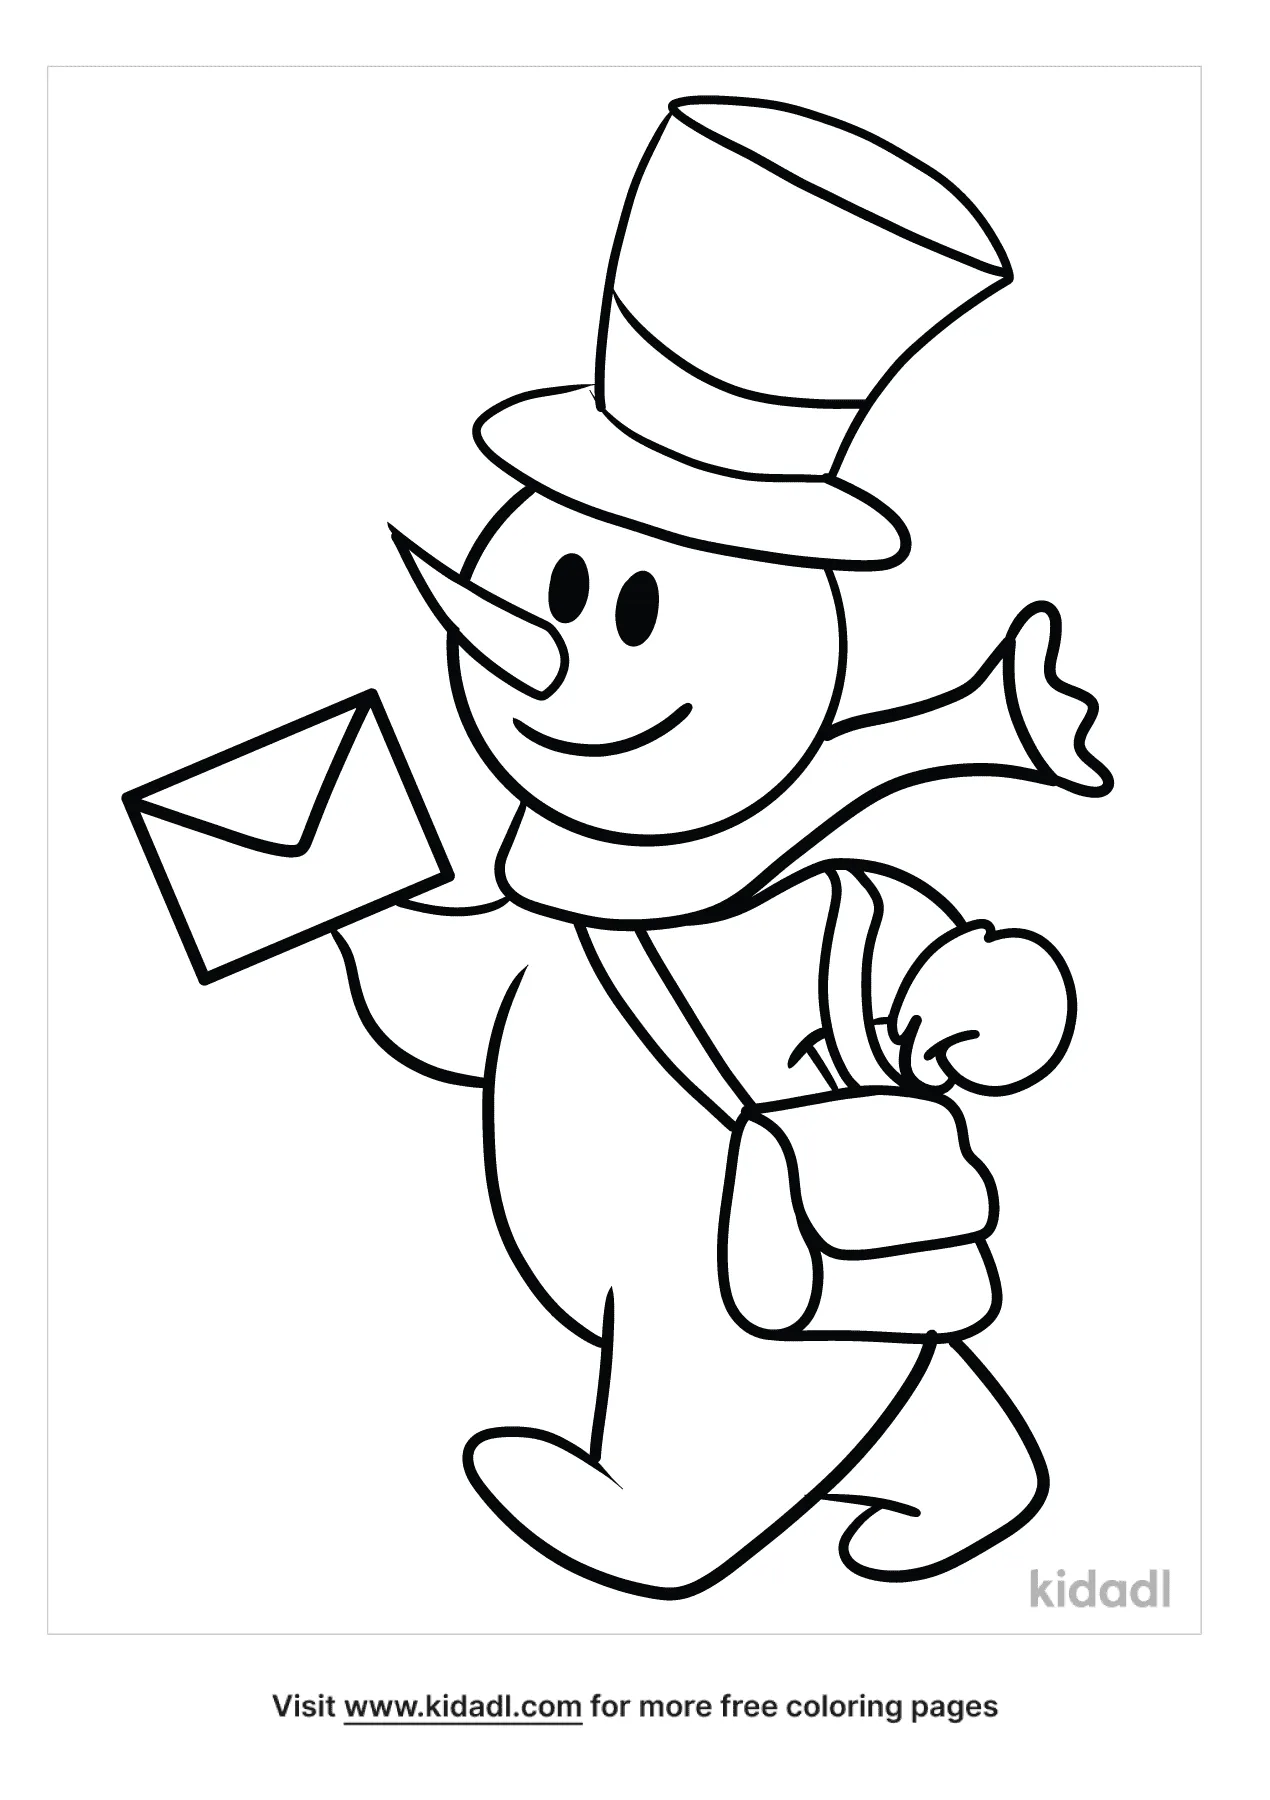 Post Office Snowman Coloring Page